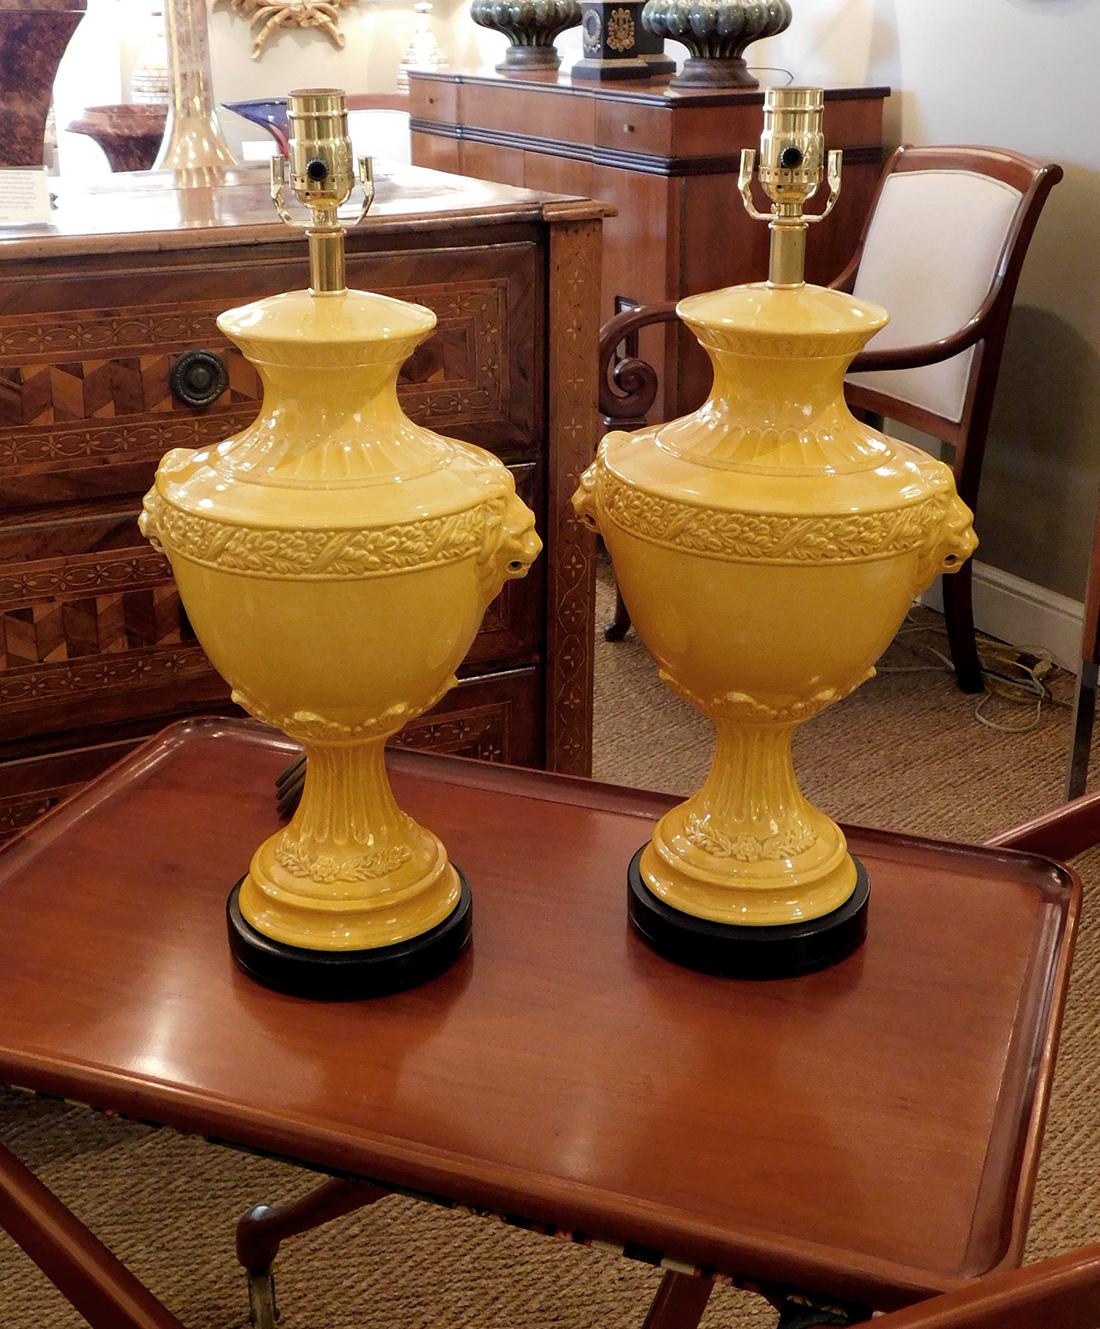 each in a rich egg yolk-yellow glaze with everted neck above an ovoid body with stylized laurel leaf perimeter band flanked by lions masks; all raised on a fluted splayed support resting on an ebonized wooden base.